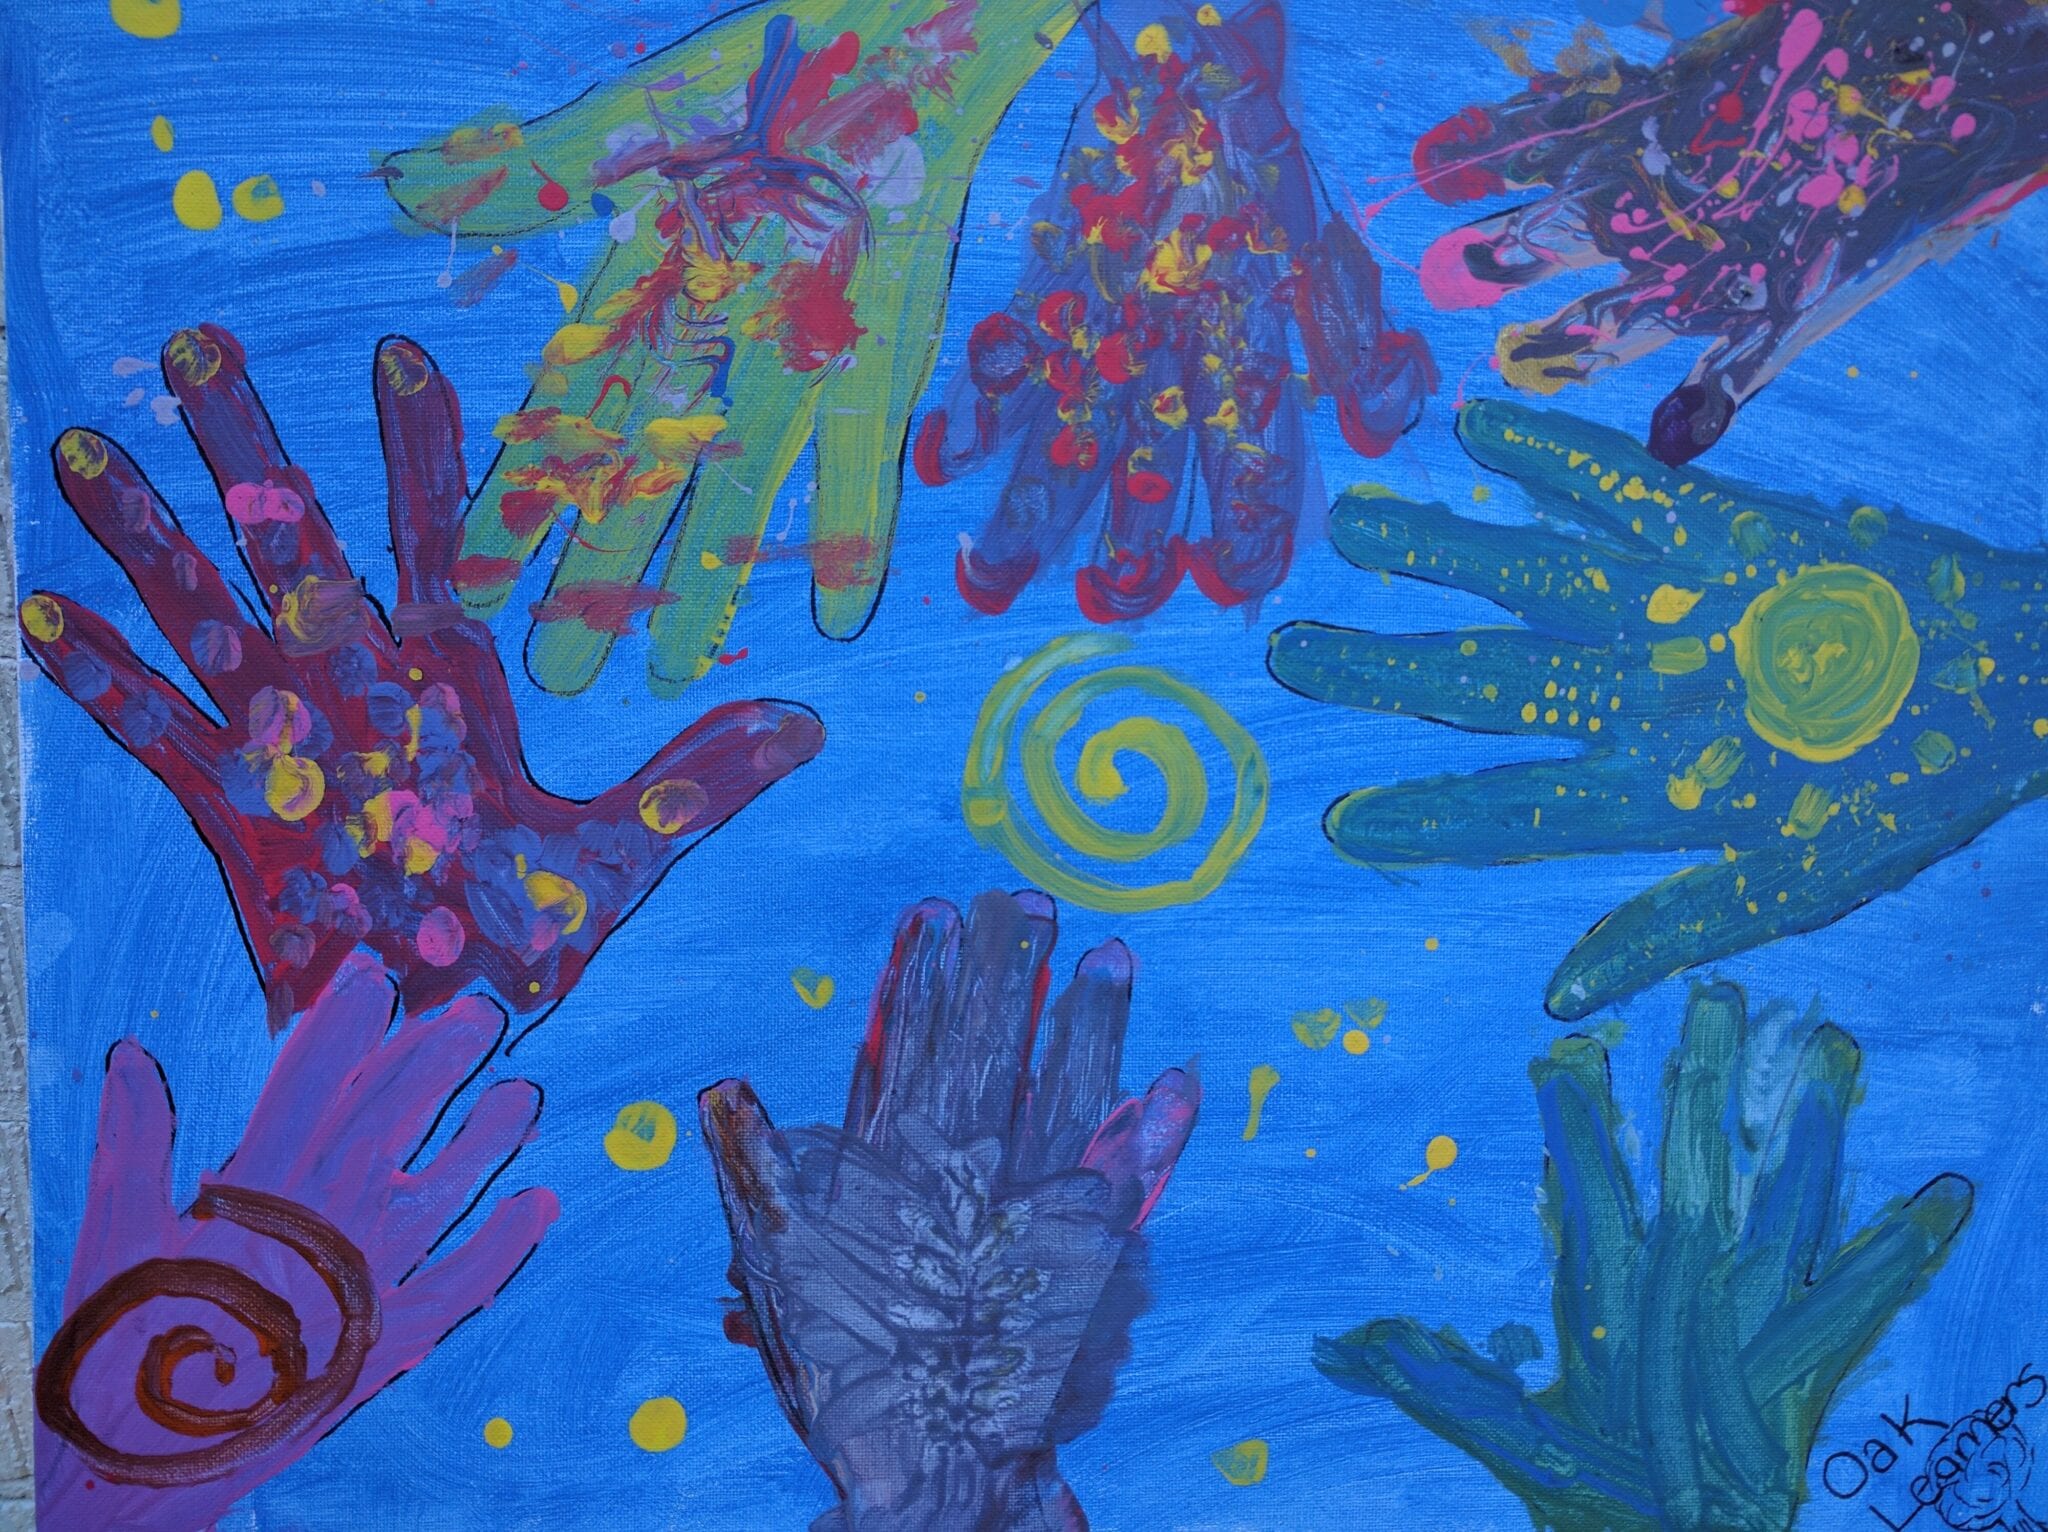 Mindfulness through Artistic Expression at Oak Learners!